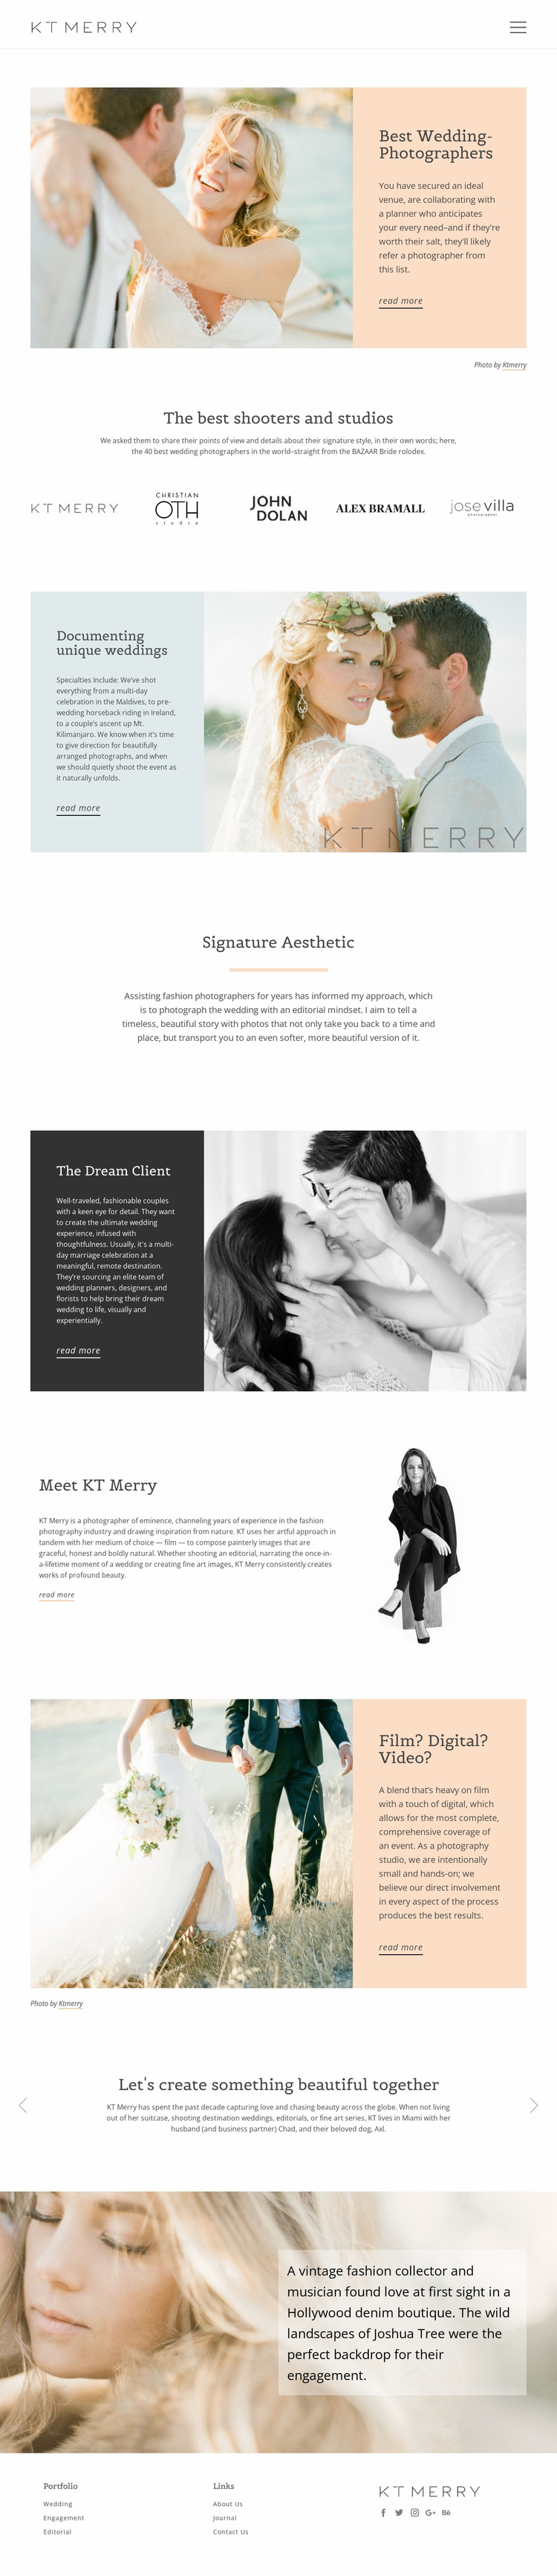 Shooters for special wedding Website Design